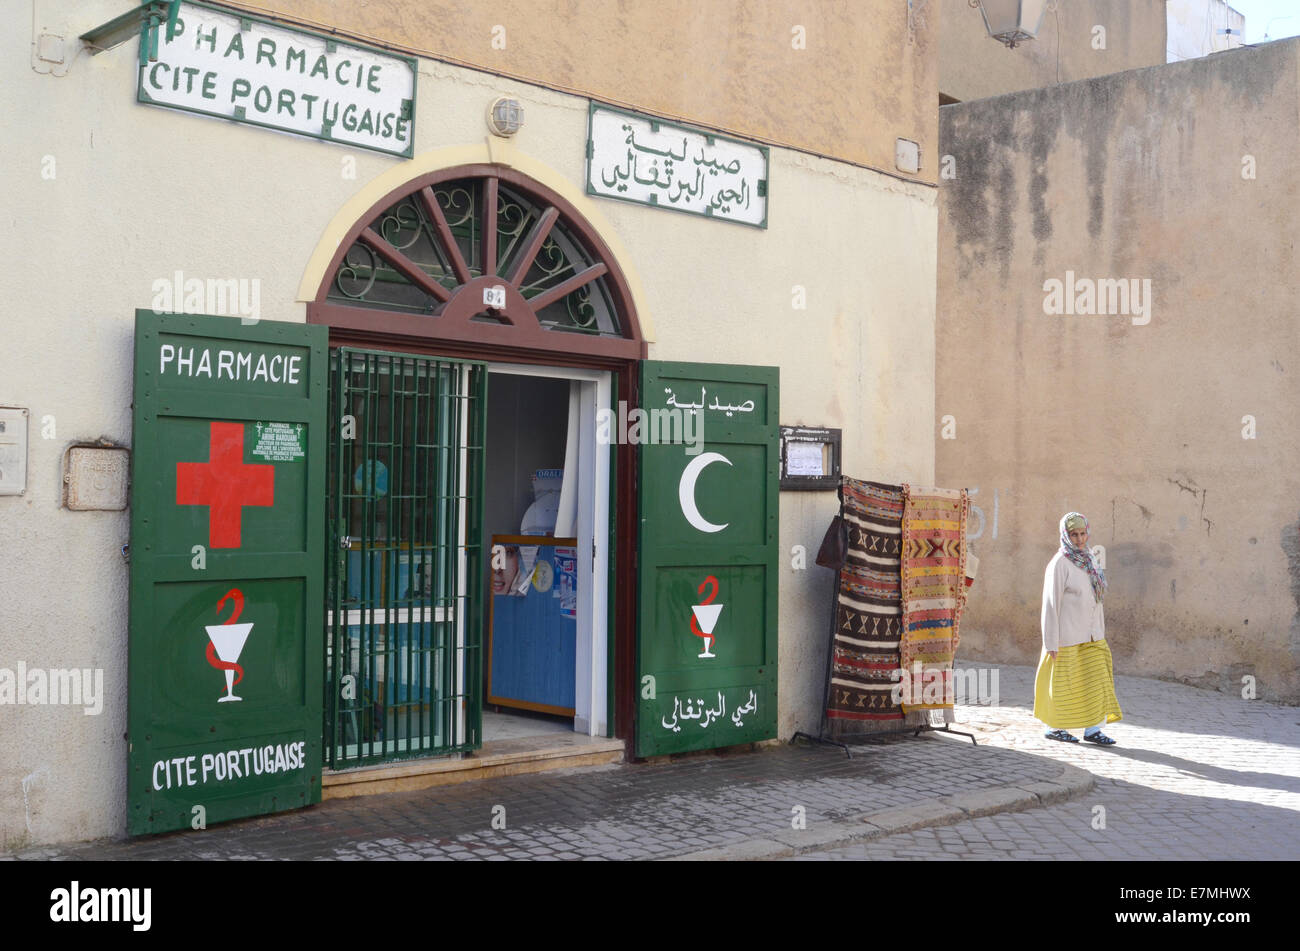 Local Moroccan woman outside pharmacy building, El Jadida, Morocco, North Africa Stock Photo